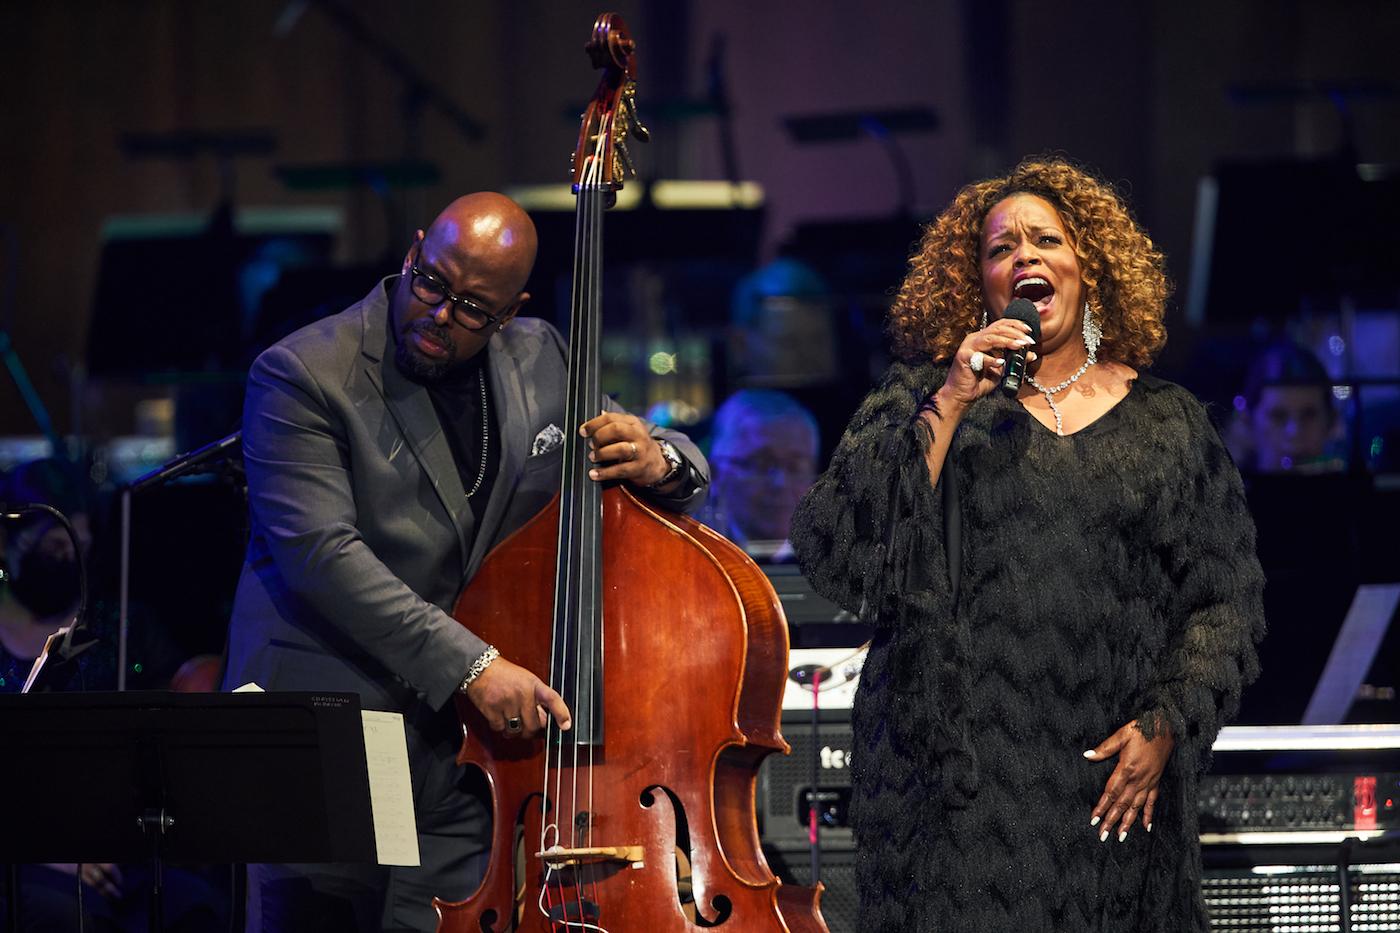 Christian McBride and Dianne Reeves perform “It Don’t Mean a Thing (If it Ain’t Got That Swing)” by Duke Ellington and Irving Mills. Photo: Scott Suchman